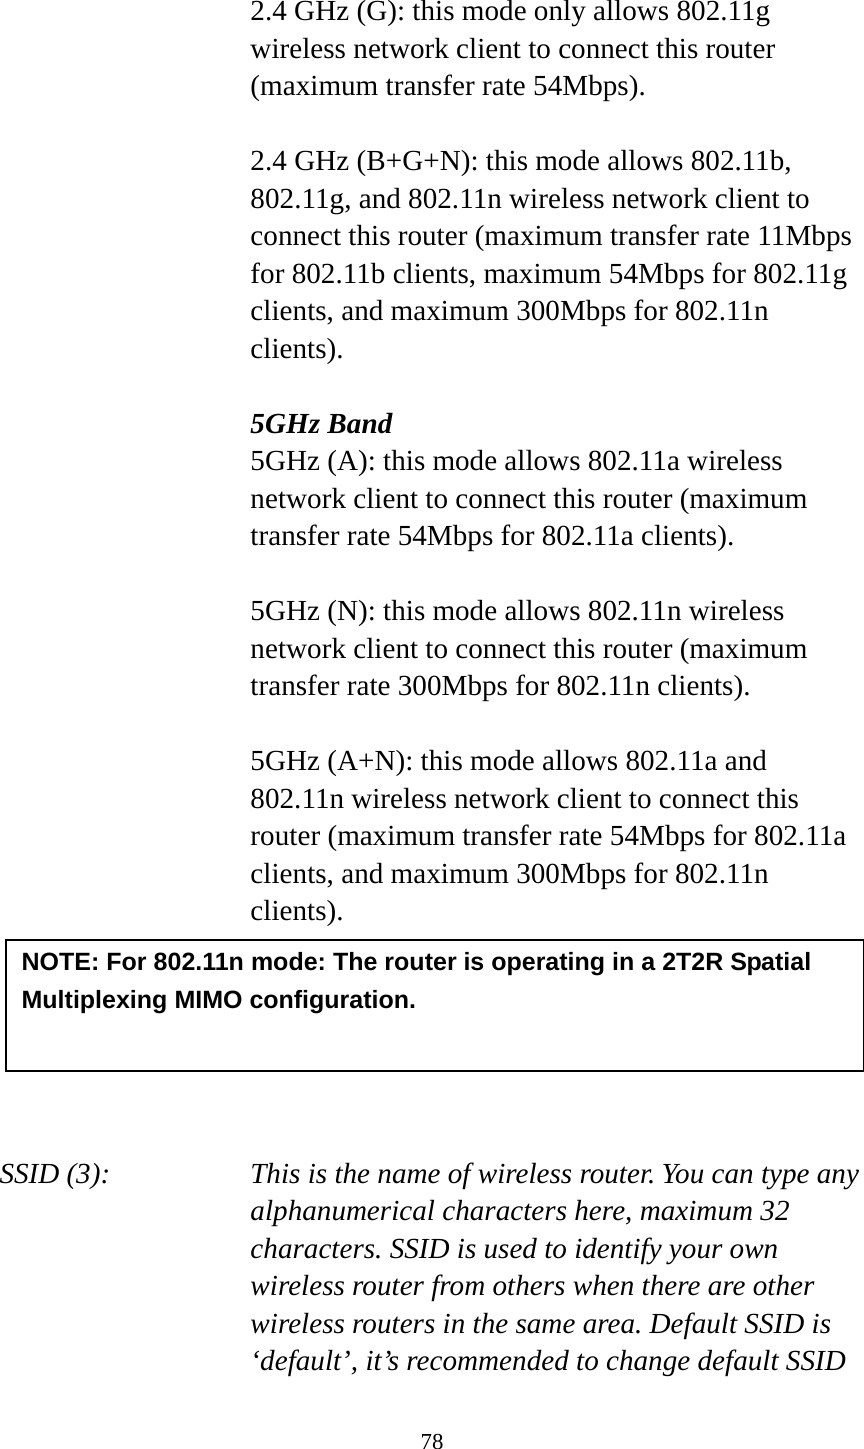 78  2.4 GHz (G): this mode only allows 802.11g wireless network client to connect this router (maximum transfer rate 54Mbps).  2.4 GHz (B+G+N): this mode allows 802.11b, 802.11g, and 802.11n wireless network client to connect this router (maximum transfer rate 11Mbps for 802.11b clients, maximum 54Mbps for 802.11g clients, and maximum 300Mbps for 802.11n clients).  5GHz Band 5GHz (A): this mode allows 802.11a wireless network client to connect this router (maximum transfer rate 54Mbps for 802.11a clients).  5GHz (N): this mode allows 802.11n wireless network client to connect this router (maximum transfer rate 300Mbps for 802.11n clients).  5GHz (A+N): this mode allows 802.11a and 802.11n wireless network client to connect this router (maximum transfer rate 54Mbps for 802.11a clients, and maximum 300Mbps for 802.11n clients).       SSID (3):    This is the name of wireless router. You can type any alphanumerical characters here, maximum 32 characters. SSID is used to identify your own wireless router from others when there are other wireless routers in the same area. Default SSID is ‘default’, it’s recommended to change default SSID NOTE: For 802.11n mode: The router is operating in a 2T2R Spatial Multiplexing MIMO configuration.    